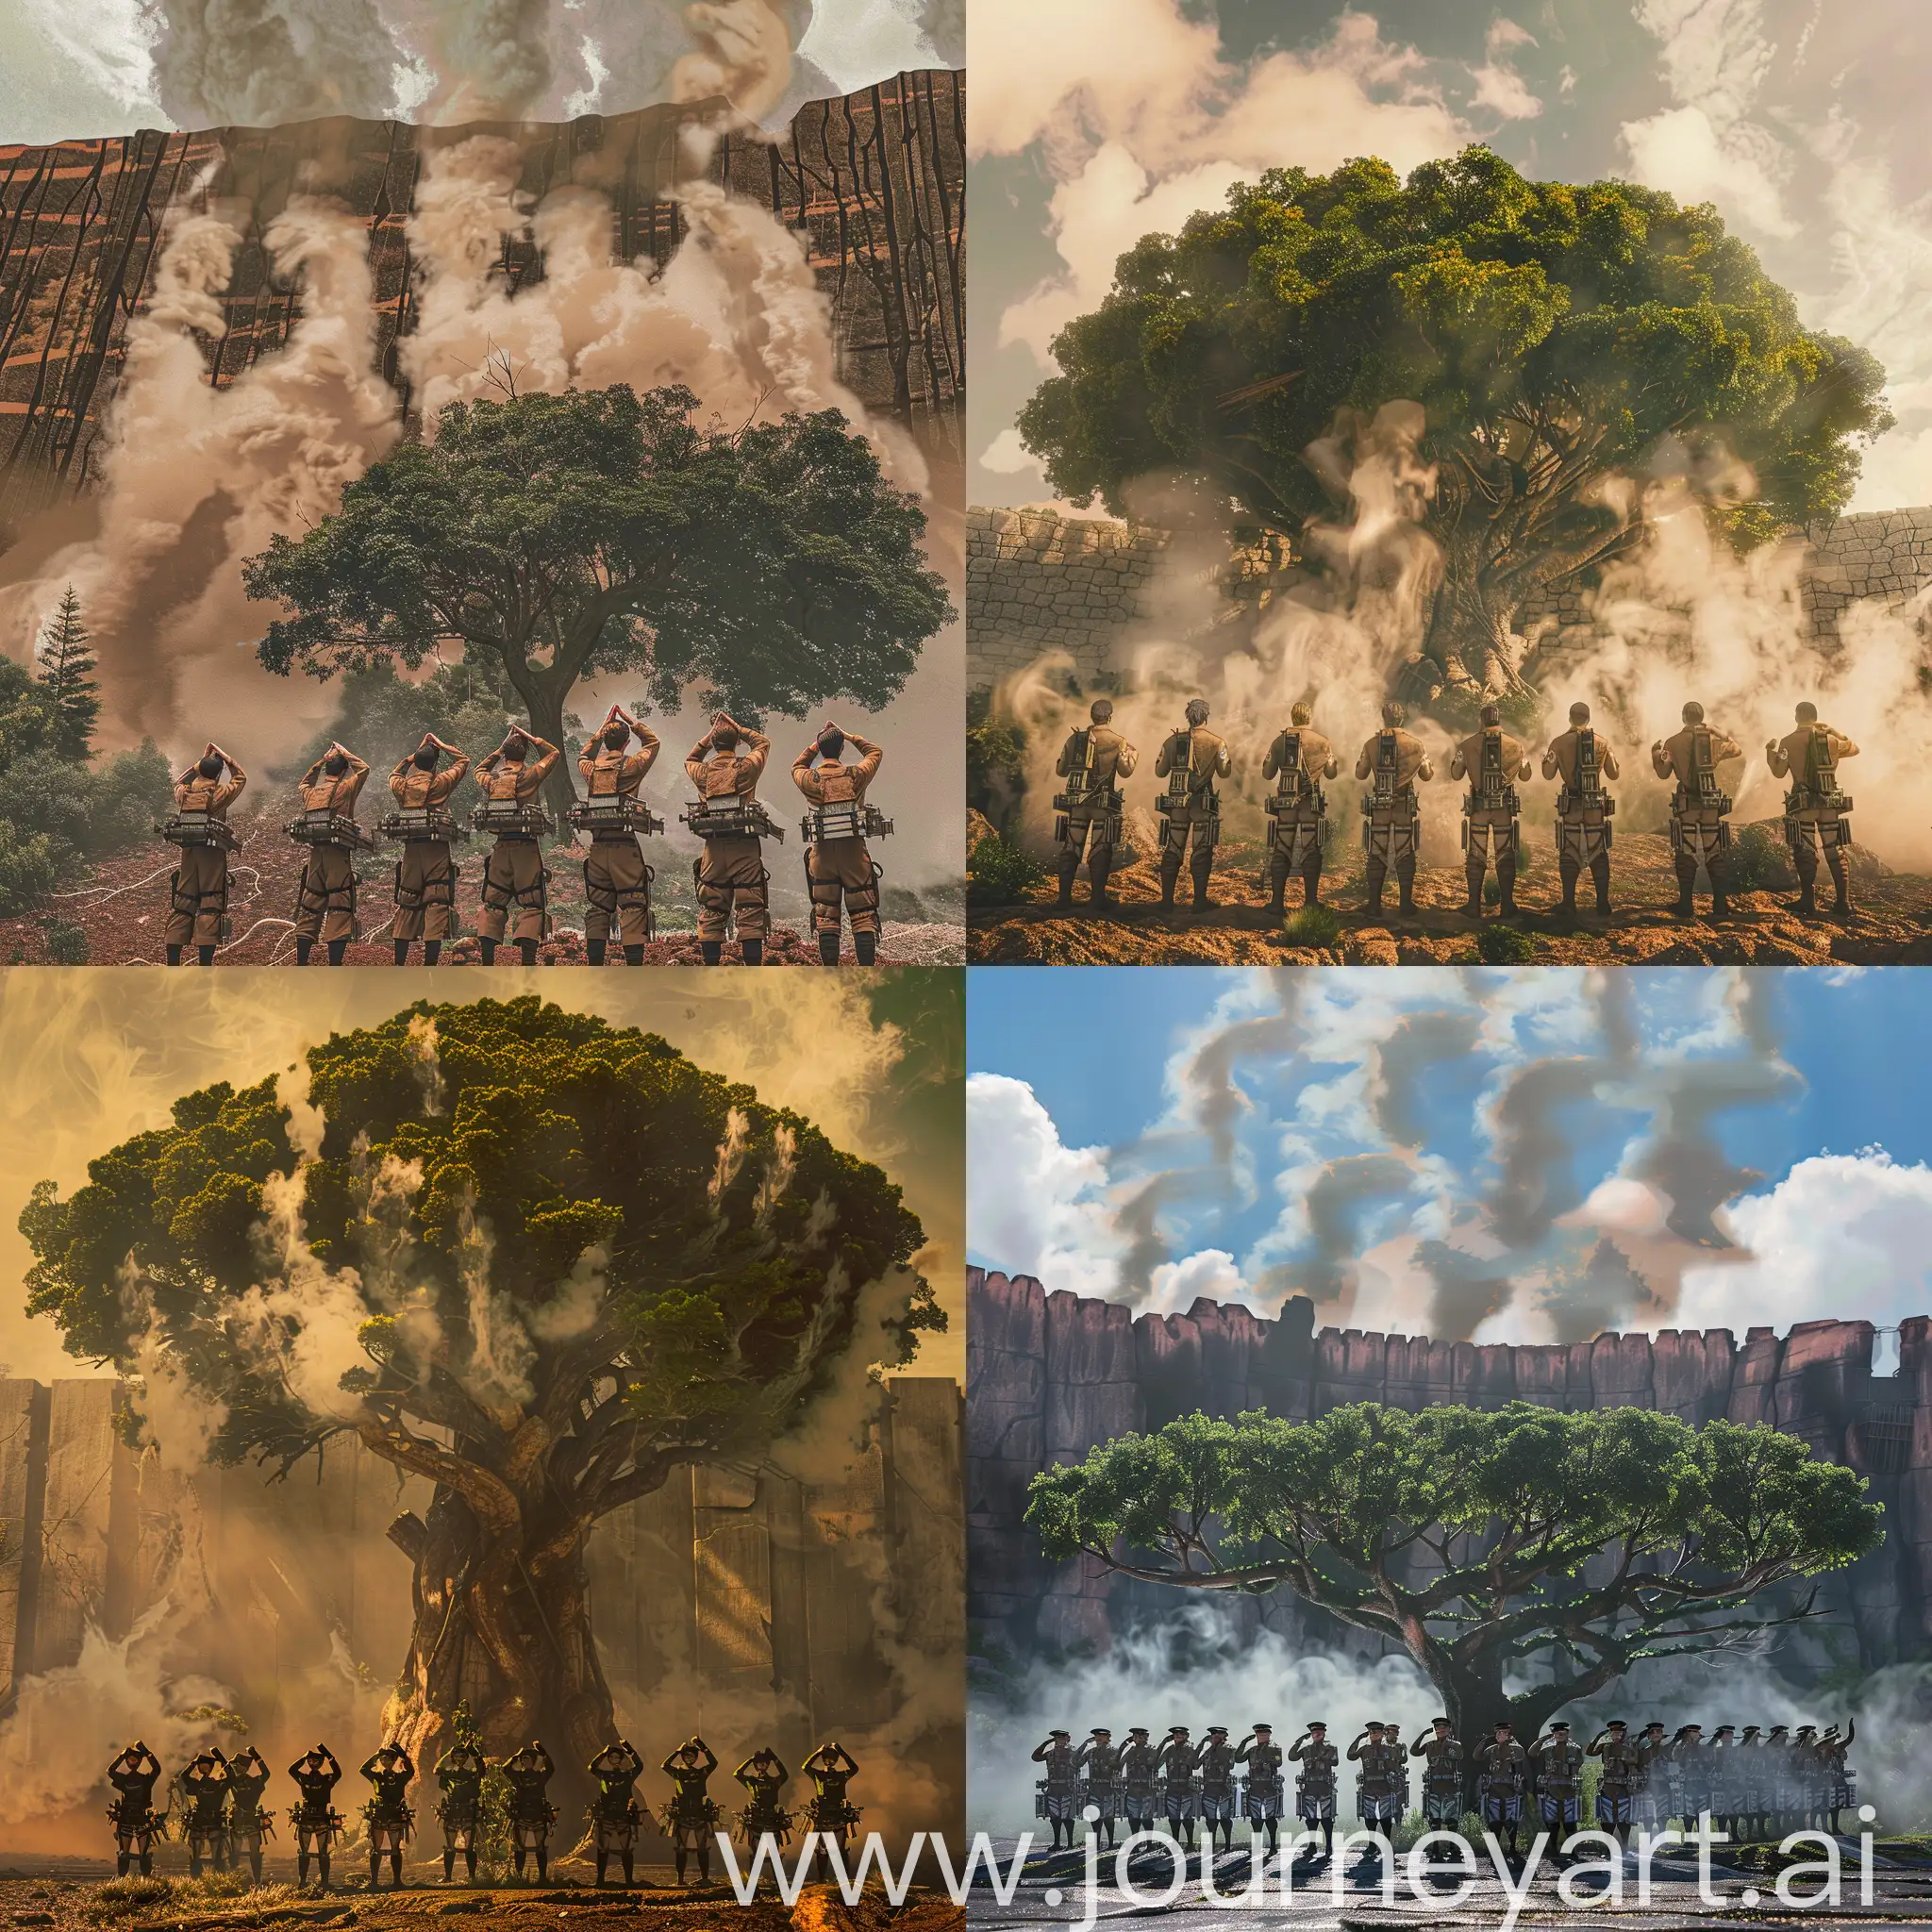 All members of the Attack of the Titans Exploration Battalion saluting from the heart! In front of the ymir tree with smoke and the shingashima wall in the background